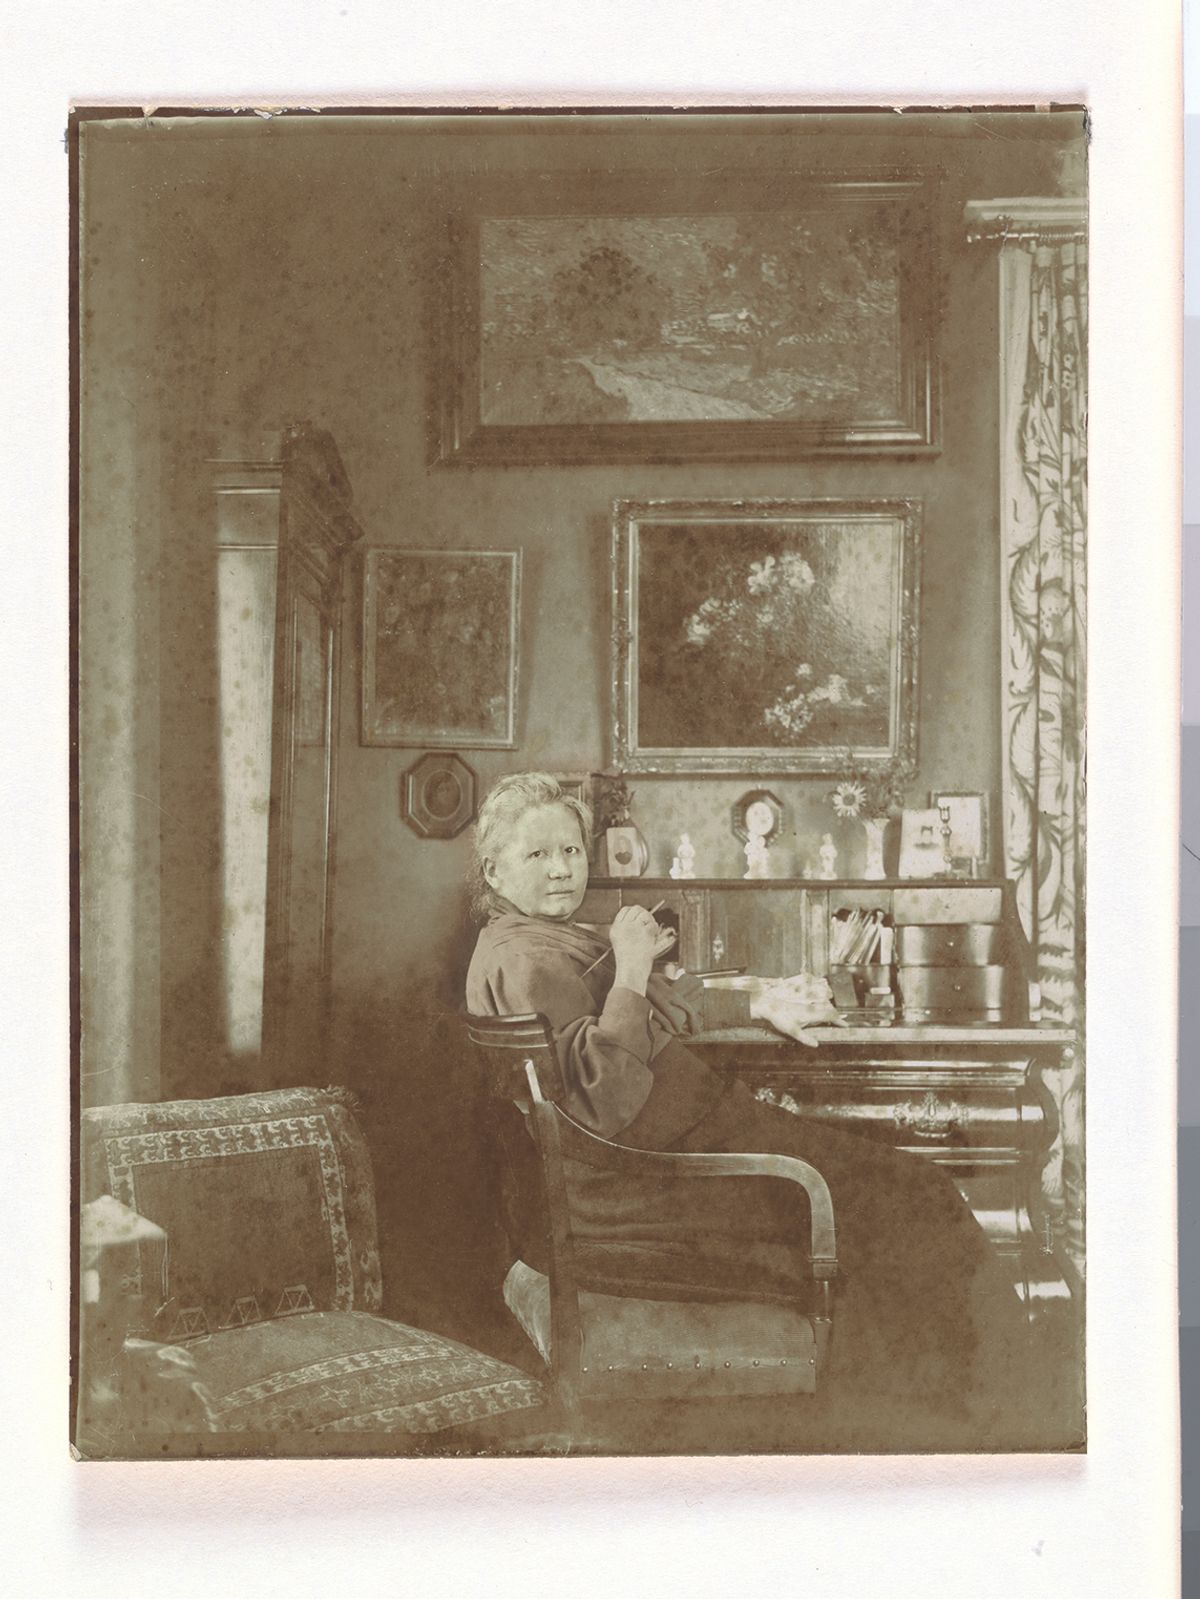 Jo van Gogh-Bonger at her desk in the living room at 77 Koninginneweg in Amsterdam (1909 or later). On the wall behind the desk are Fantin-Latour’s Flowers and Vincent van Gogh’s Vase of Honesty (1884), with Landscape at Twilight (1890) at the top Credit: Unknown photographer. Van Gogh Museum; Amsterdam (Vincent van Gogh Foundation)